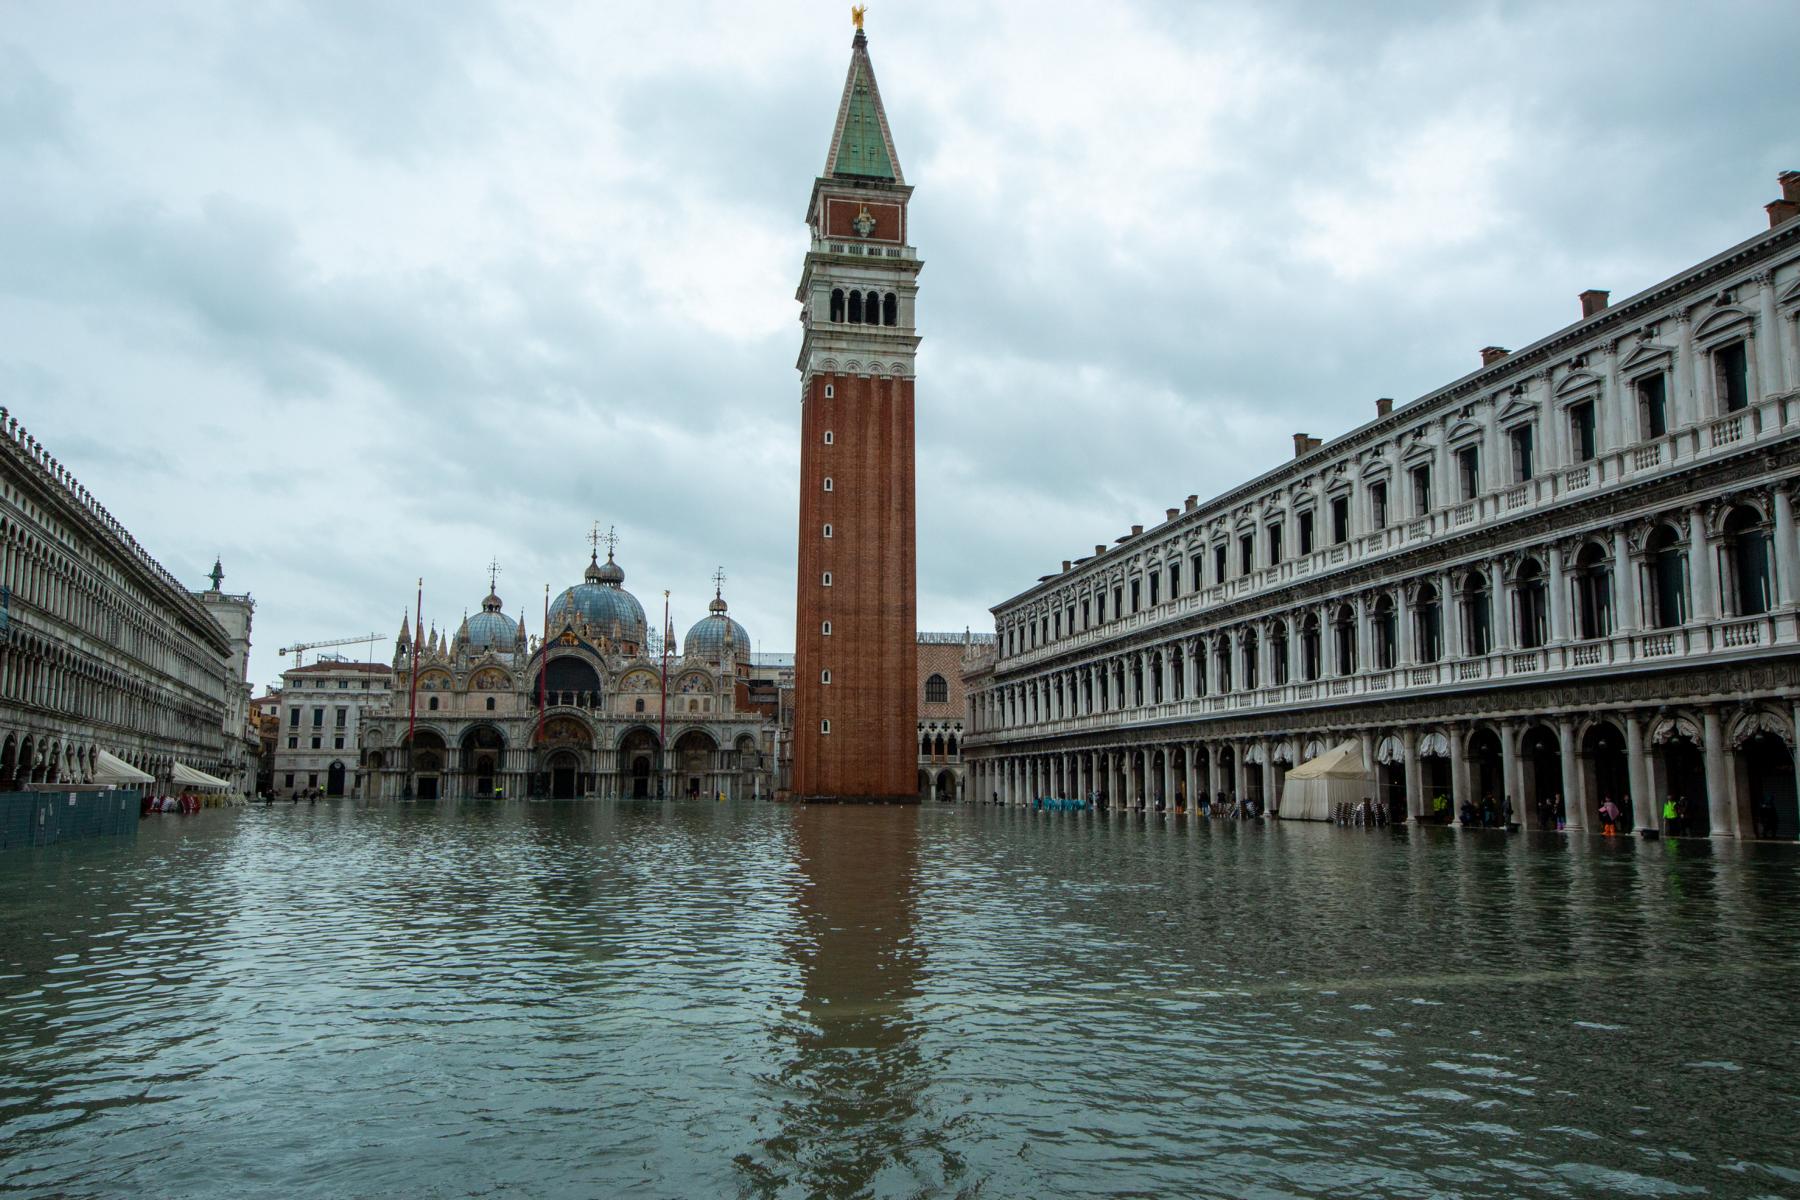 Don’t Let the Rain Spoil Your Trip: 7 Things to Do in Venice When It Rains